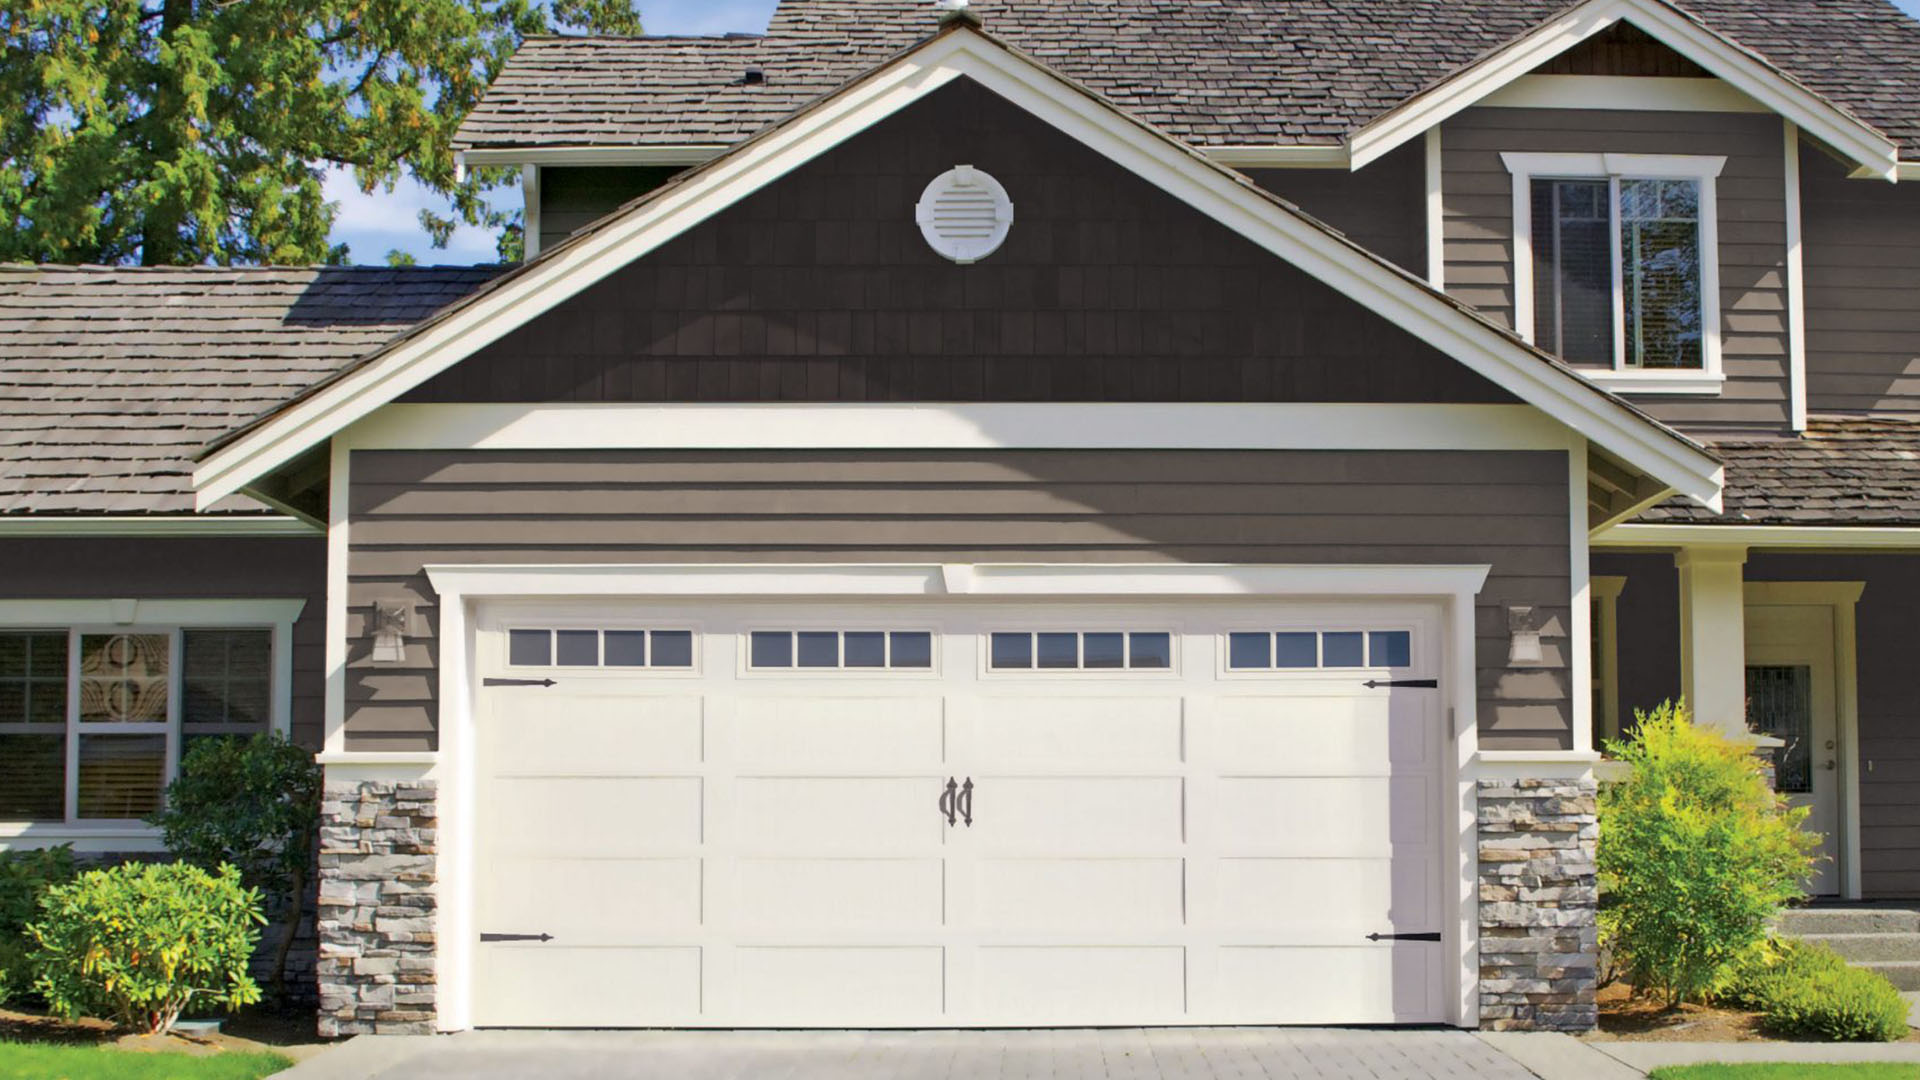 Garage positioned in center of home